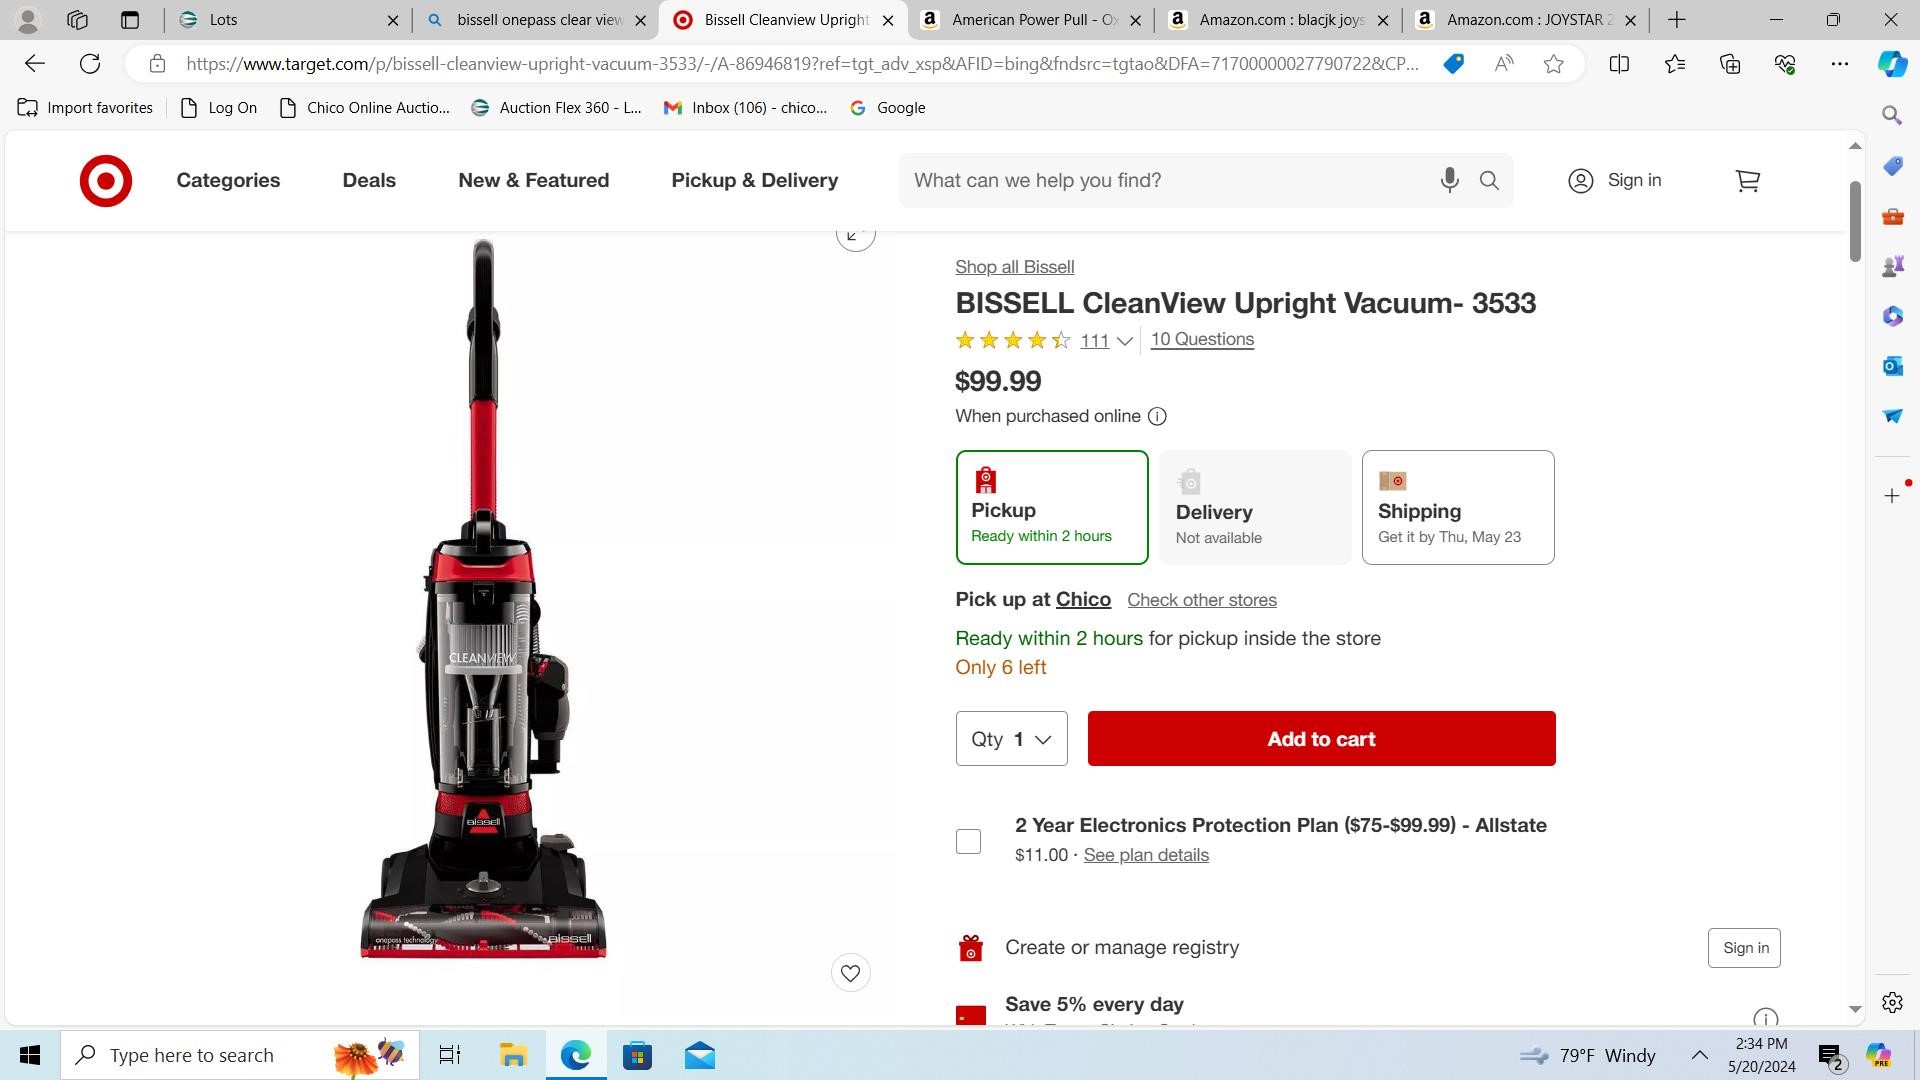 $99 - BISSELL CleanView Upright Vacuum- 3533